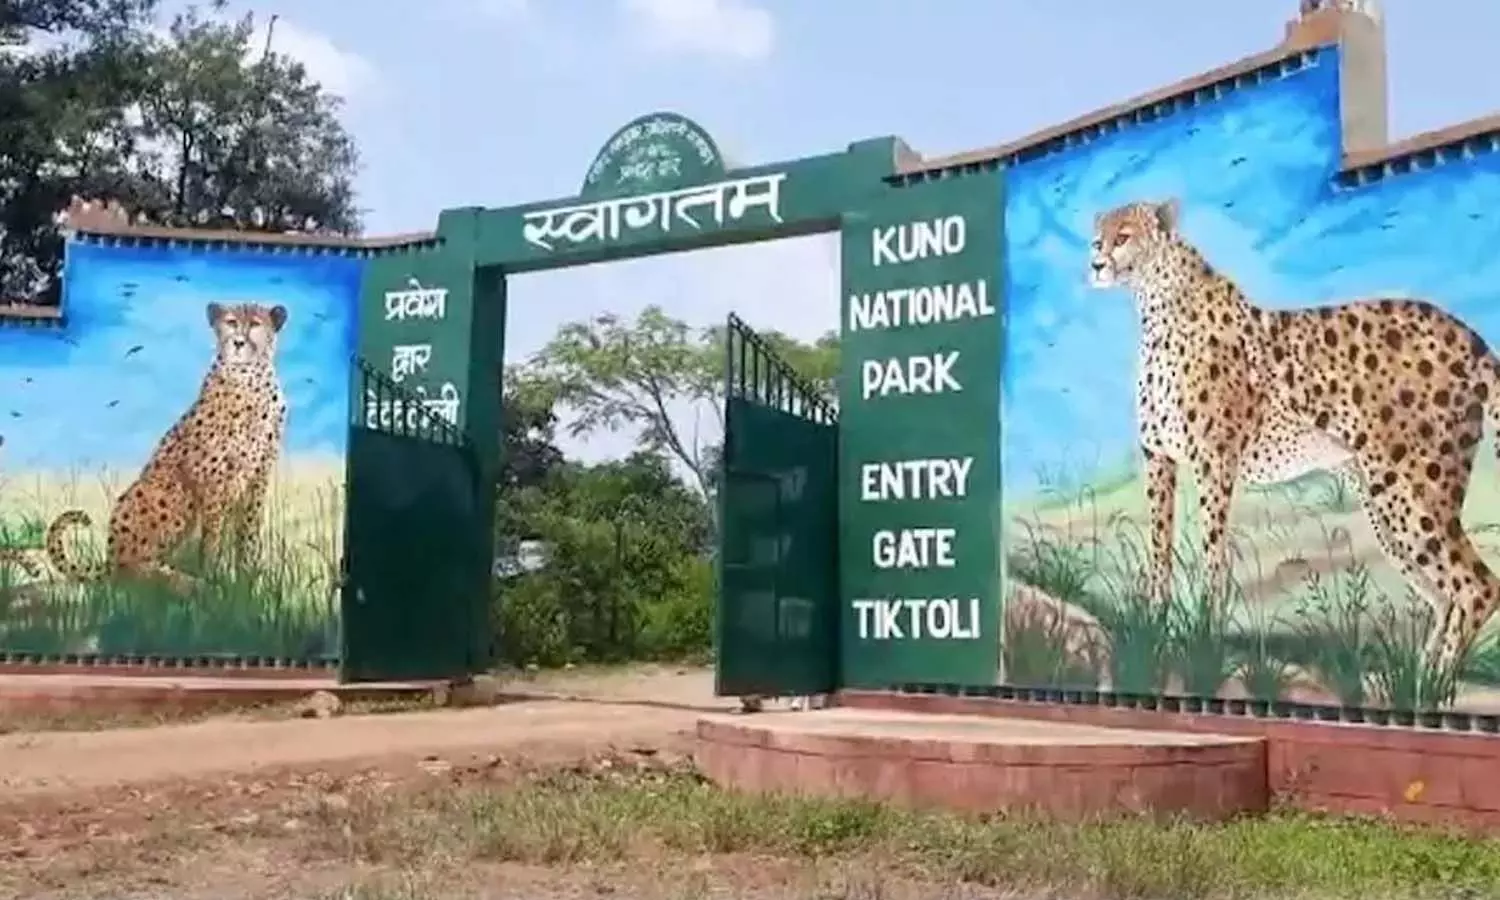 2 out of 8 cheetahs brought to Kuno National Park were released in a large enclosure, 50 days of quarantine ended